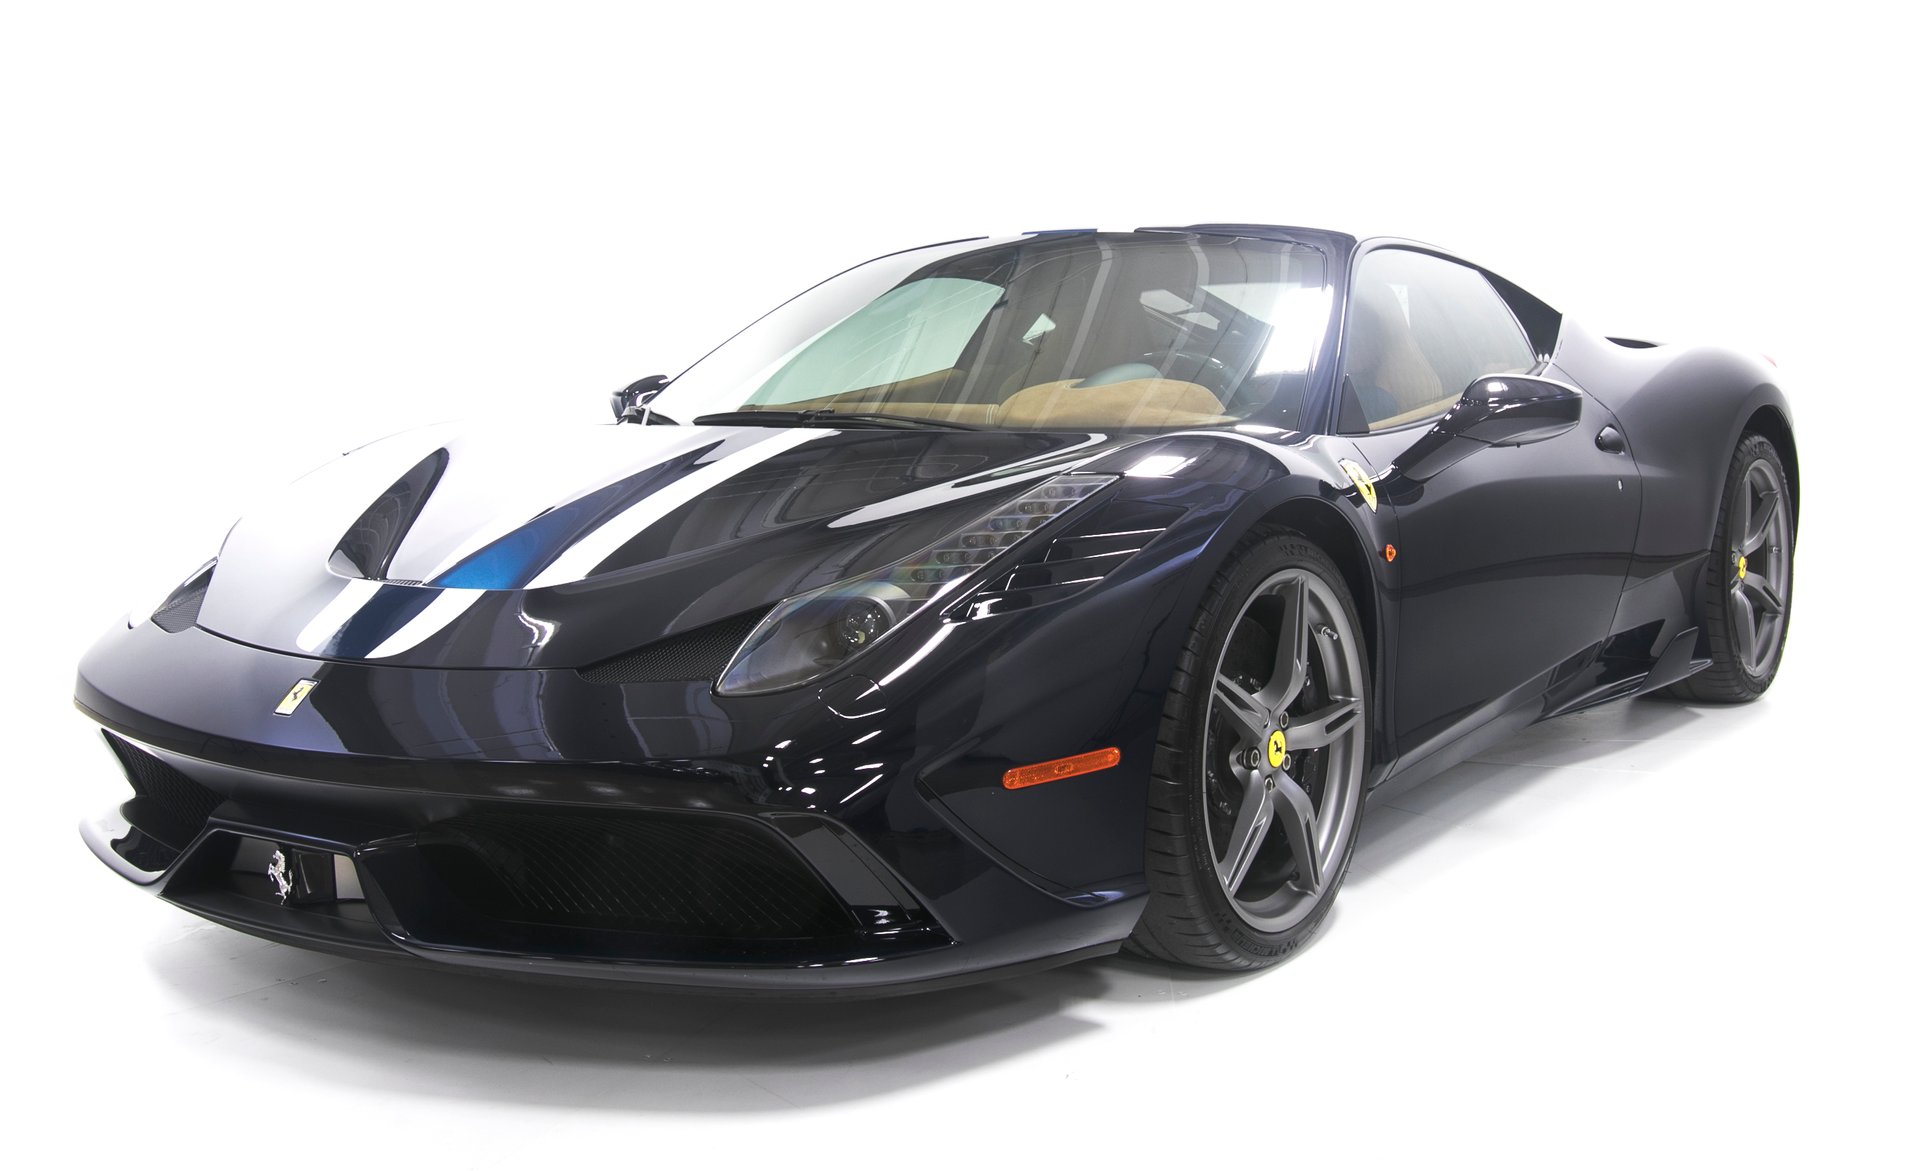 2015 Ferrari 458 Speciale Motorcar Gallery Classic Cars For Sale Since 1985